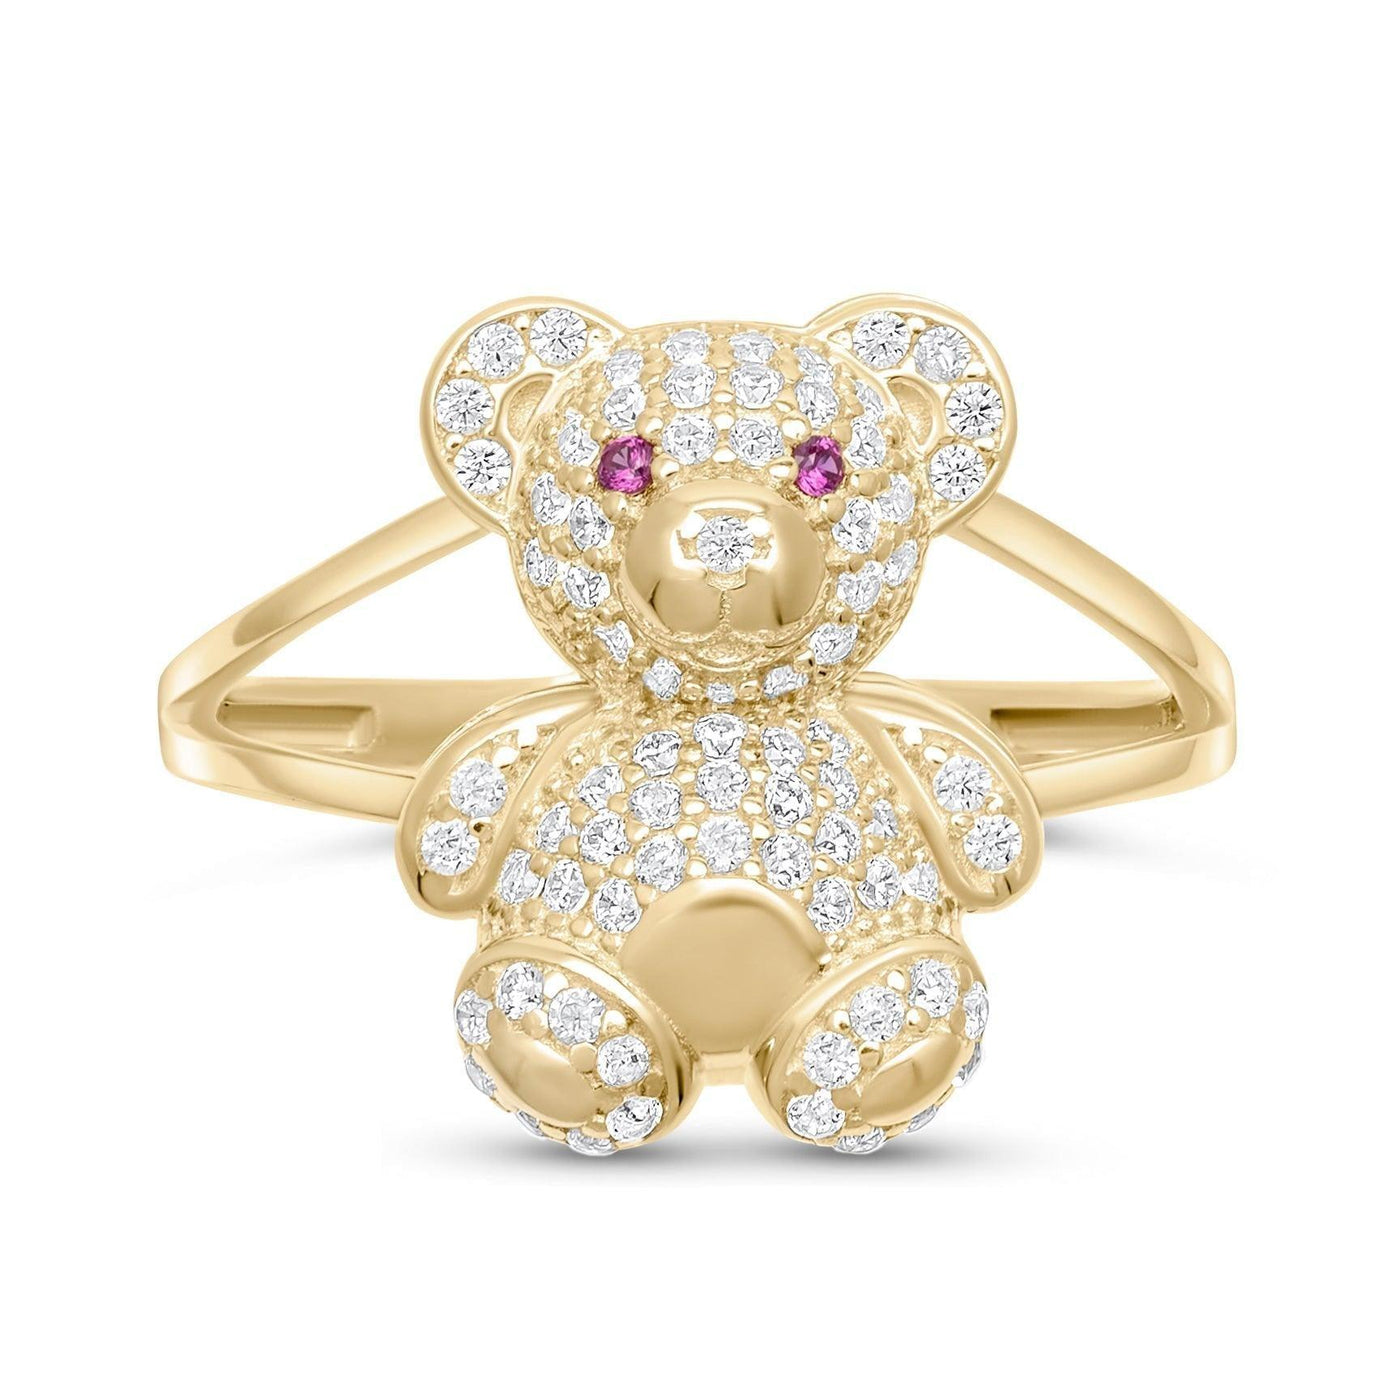 cz teddy bear with colorful eyes ring solid 10k yellow gold bayamjewelry 7 24150972 a181 4843 9f62